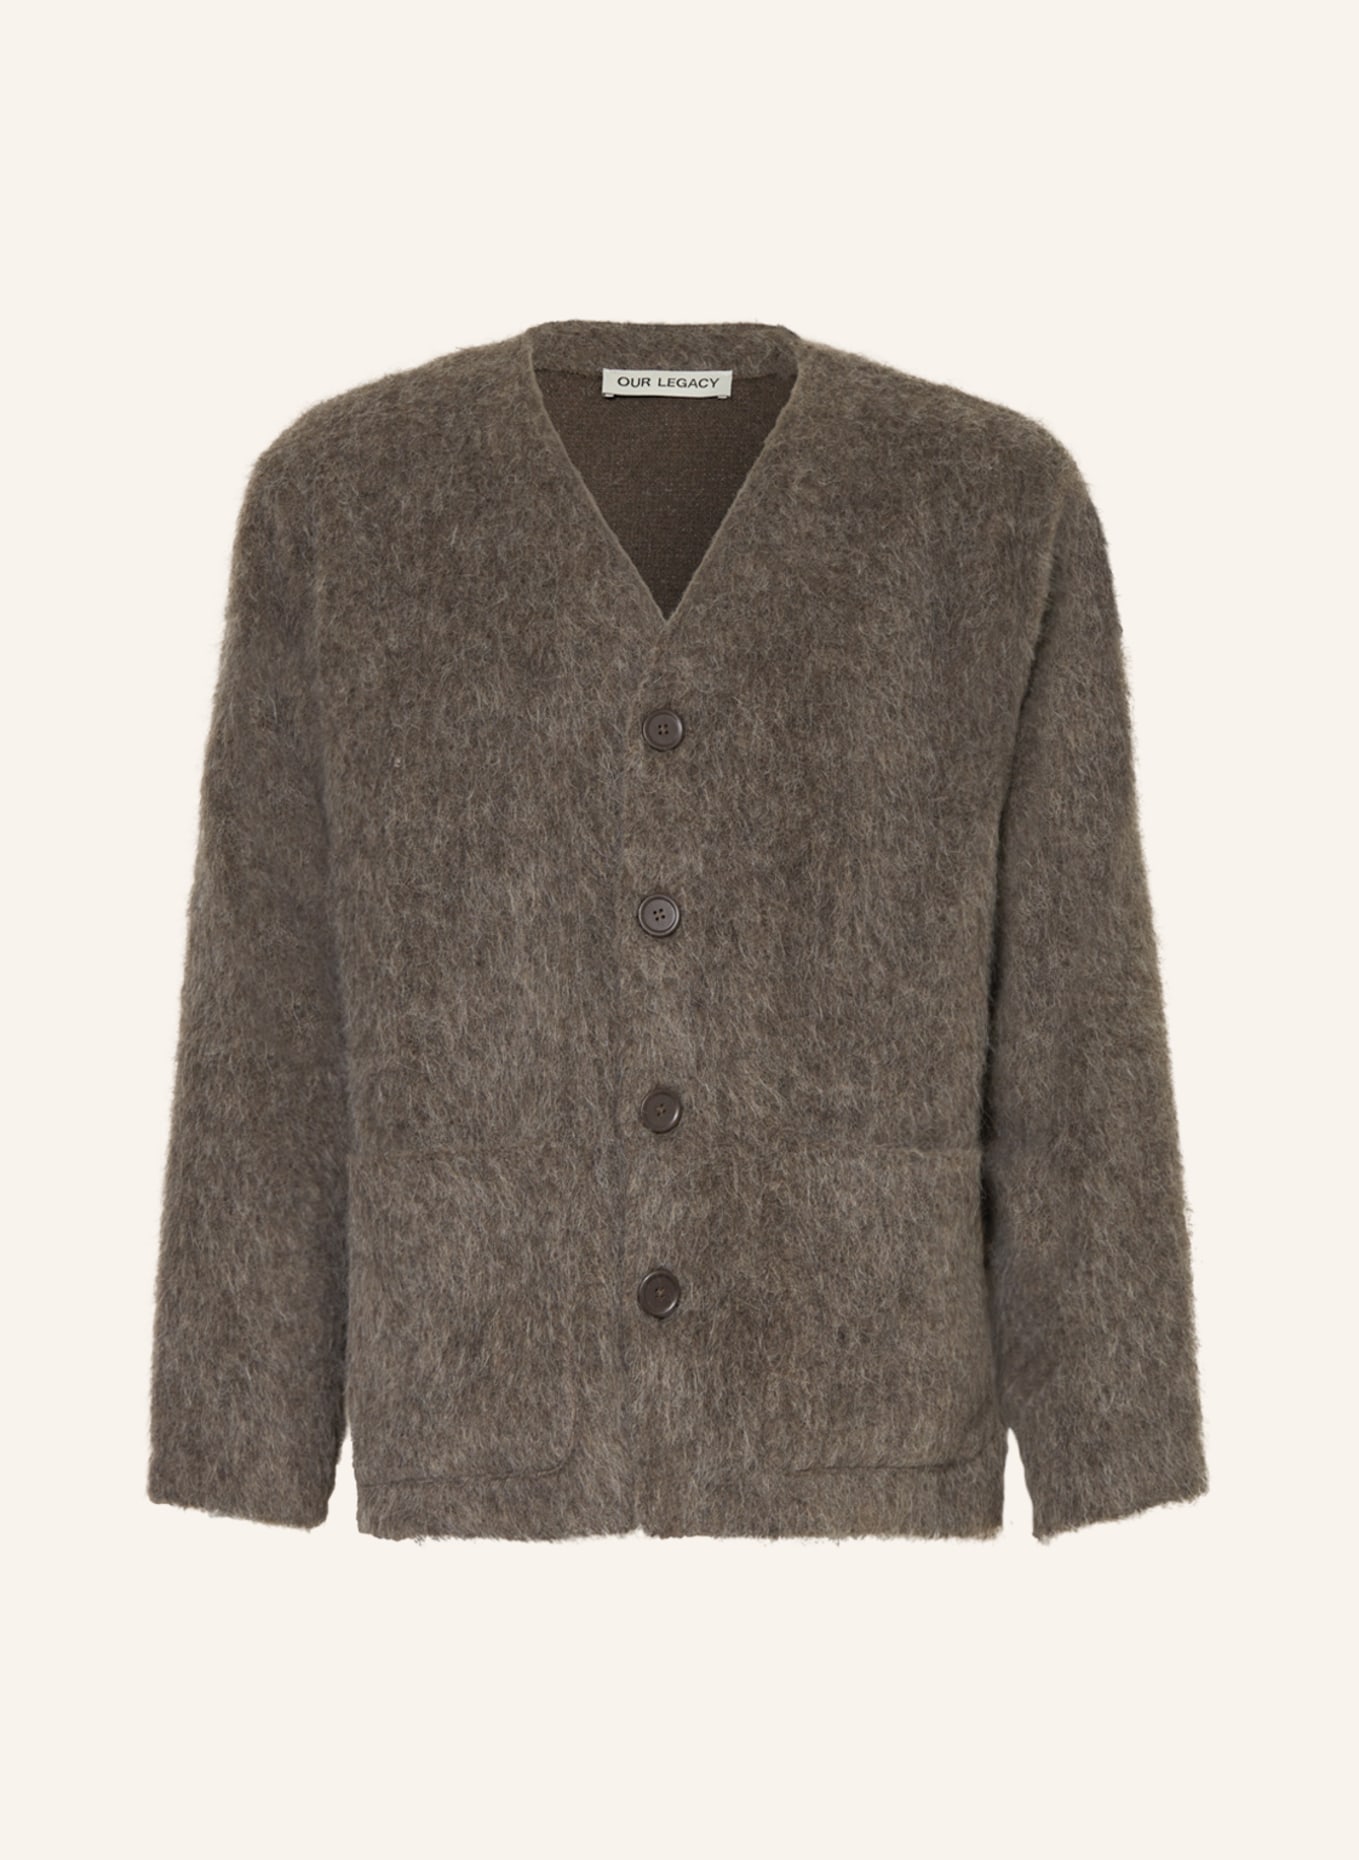 OUR LEGACY Cardigan, Color: GRAY (Image 1)